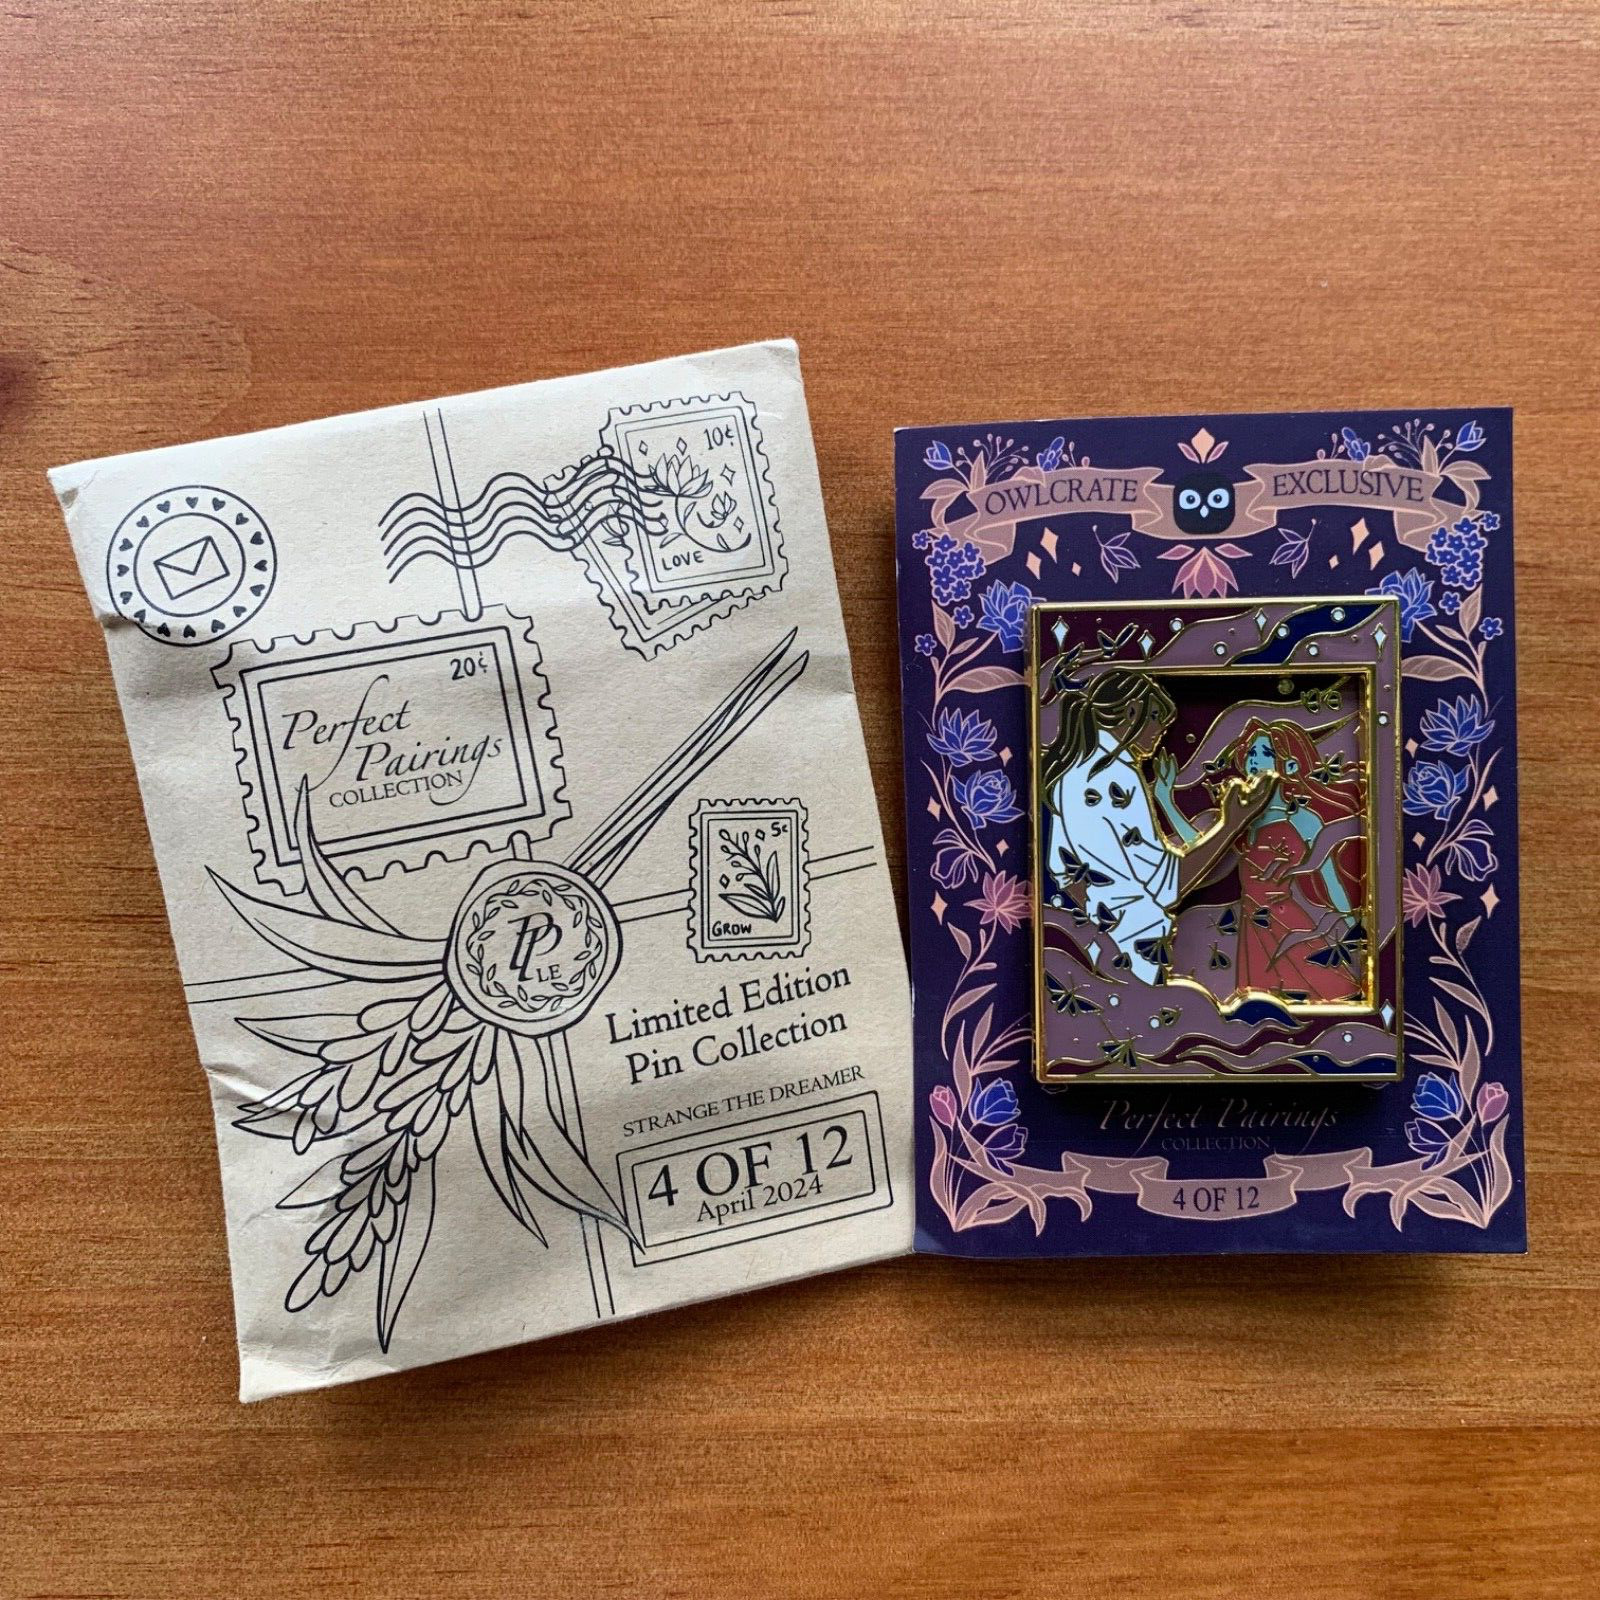 OwlCrate Exclusive Strange the Dreamer Perfect Pairings Sliding Pin